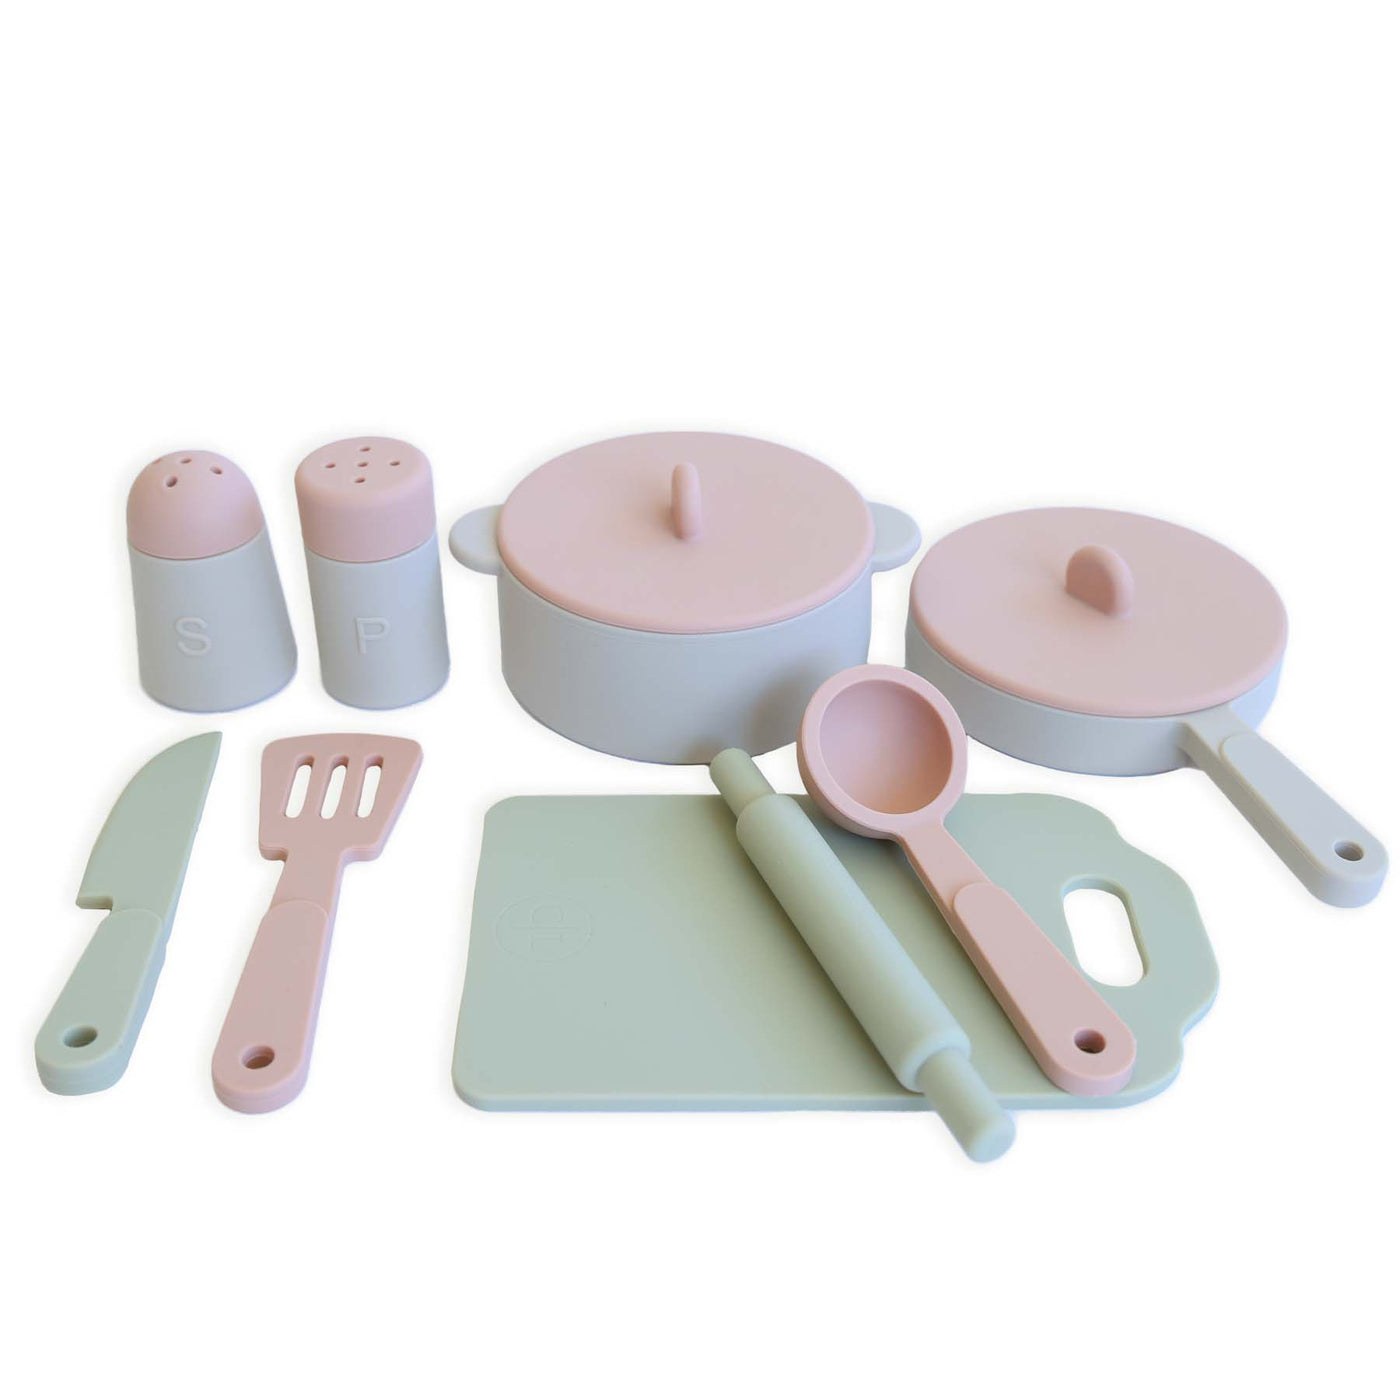 pink and green silicone play kitchen set